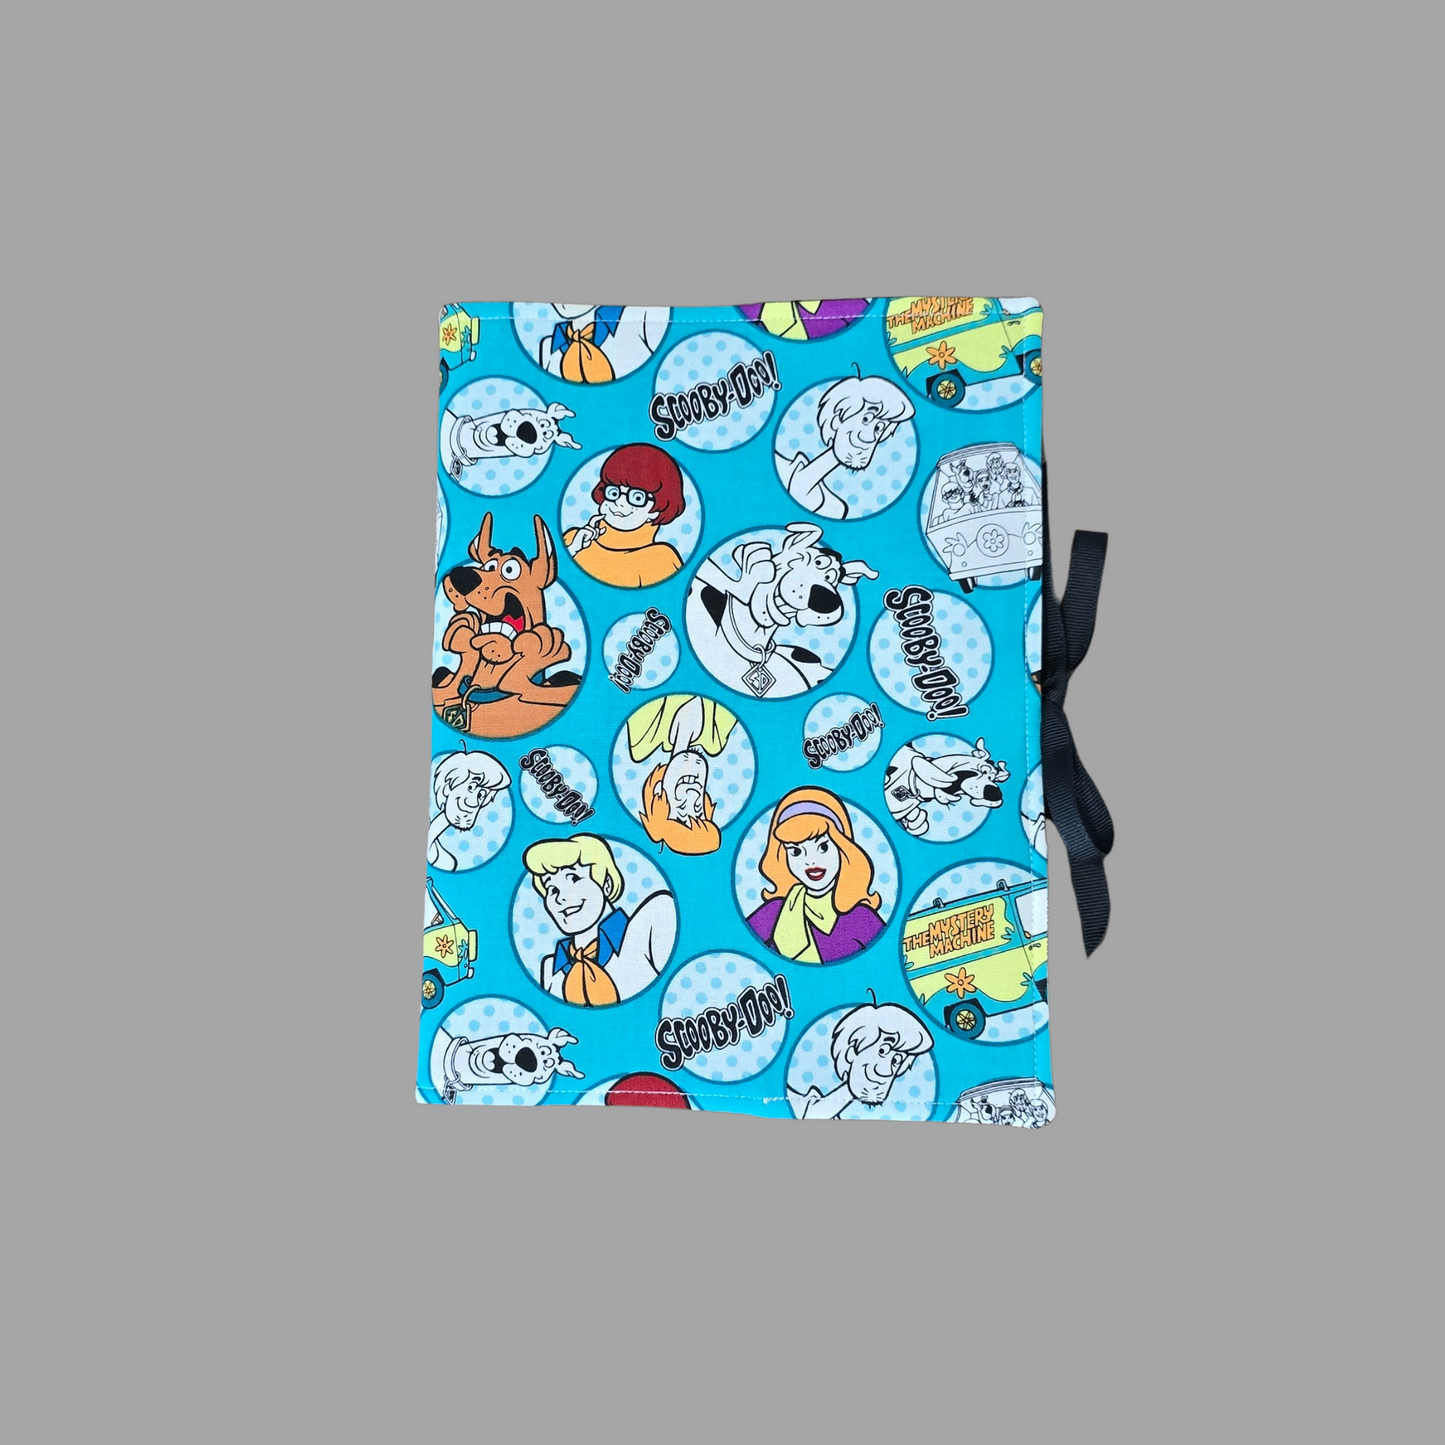 Scooby Doo & Gang Notebook Composition Book Cover, Classic Scooby School Office Journal Diary